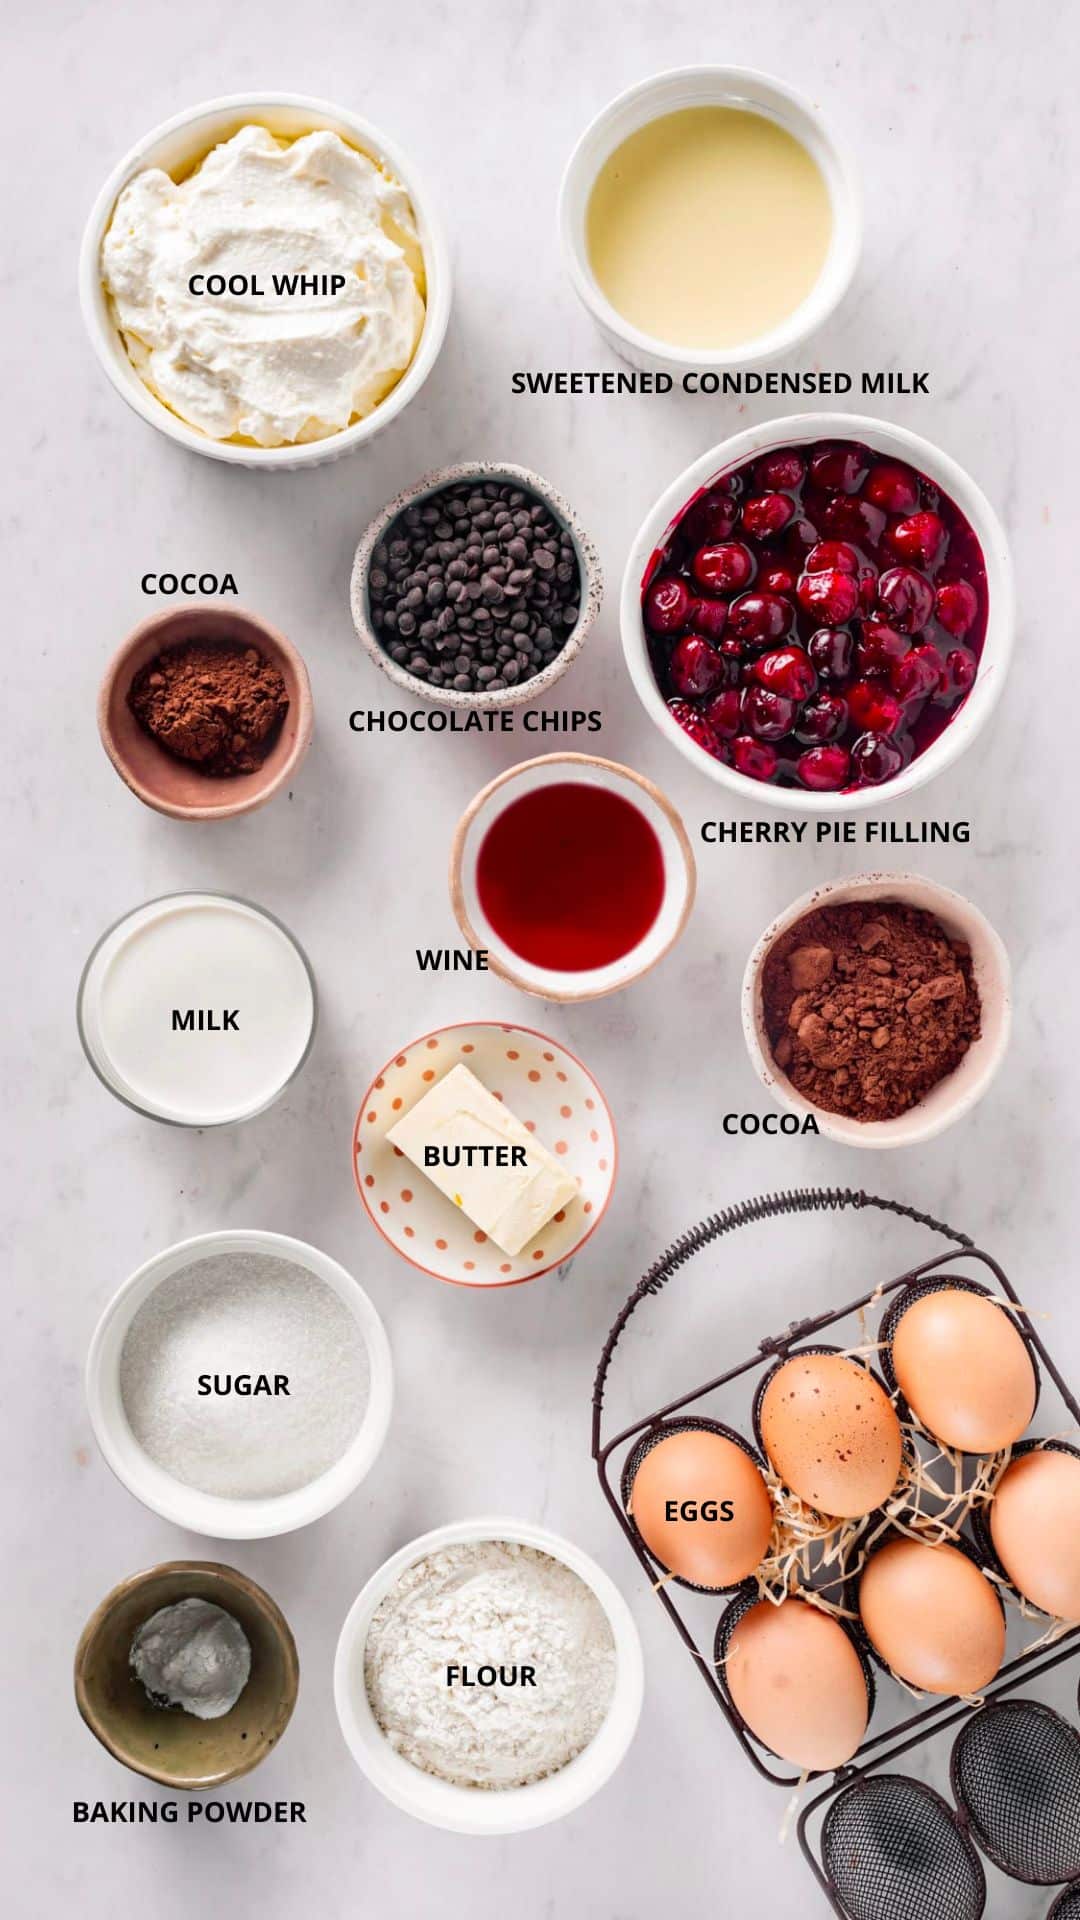 drunken cherry chocolate cake ingredients- sweetened condensed milk, cool whip, cocoa, chocolate chips, cherry pie filling, cocoa, milk, wine, butter, sugar, eggs, flour, and baking powder.